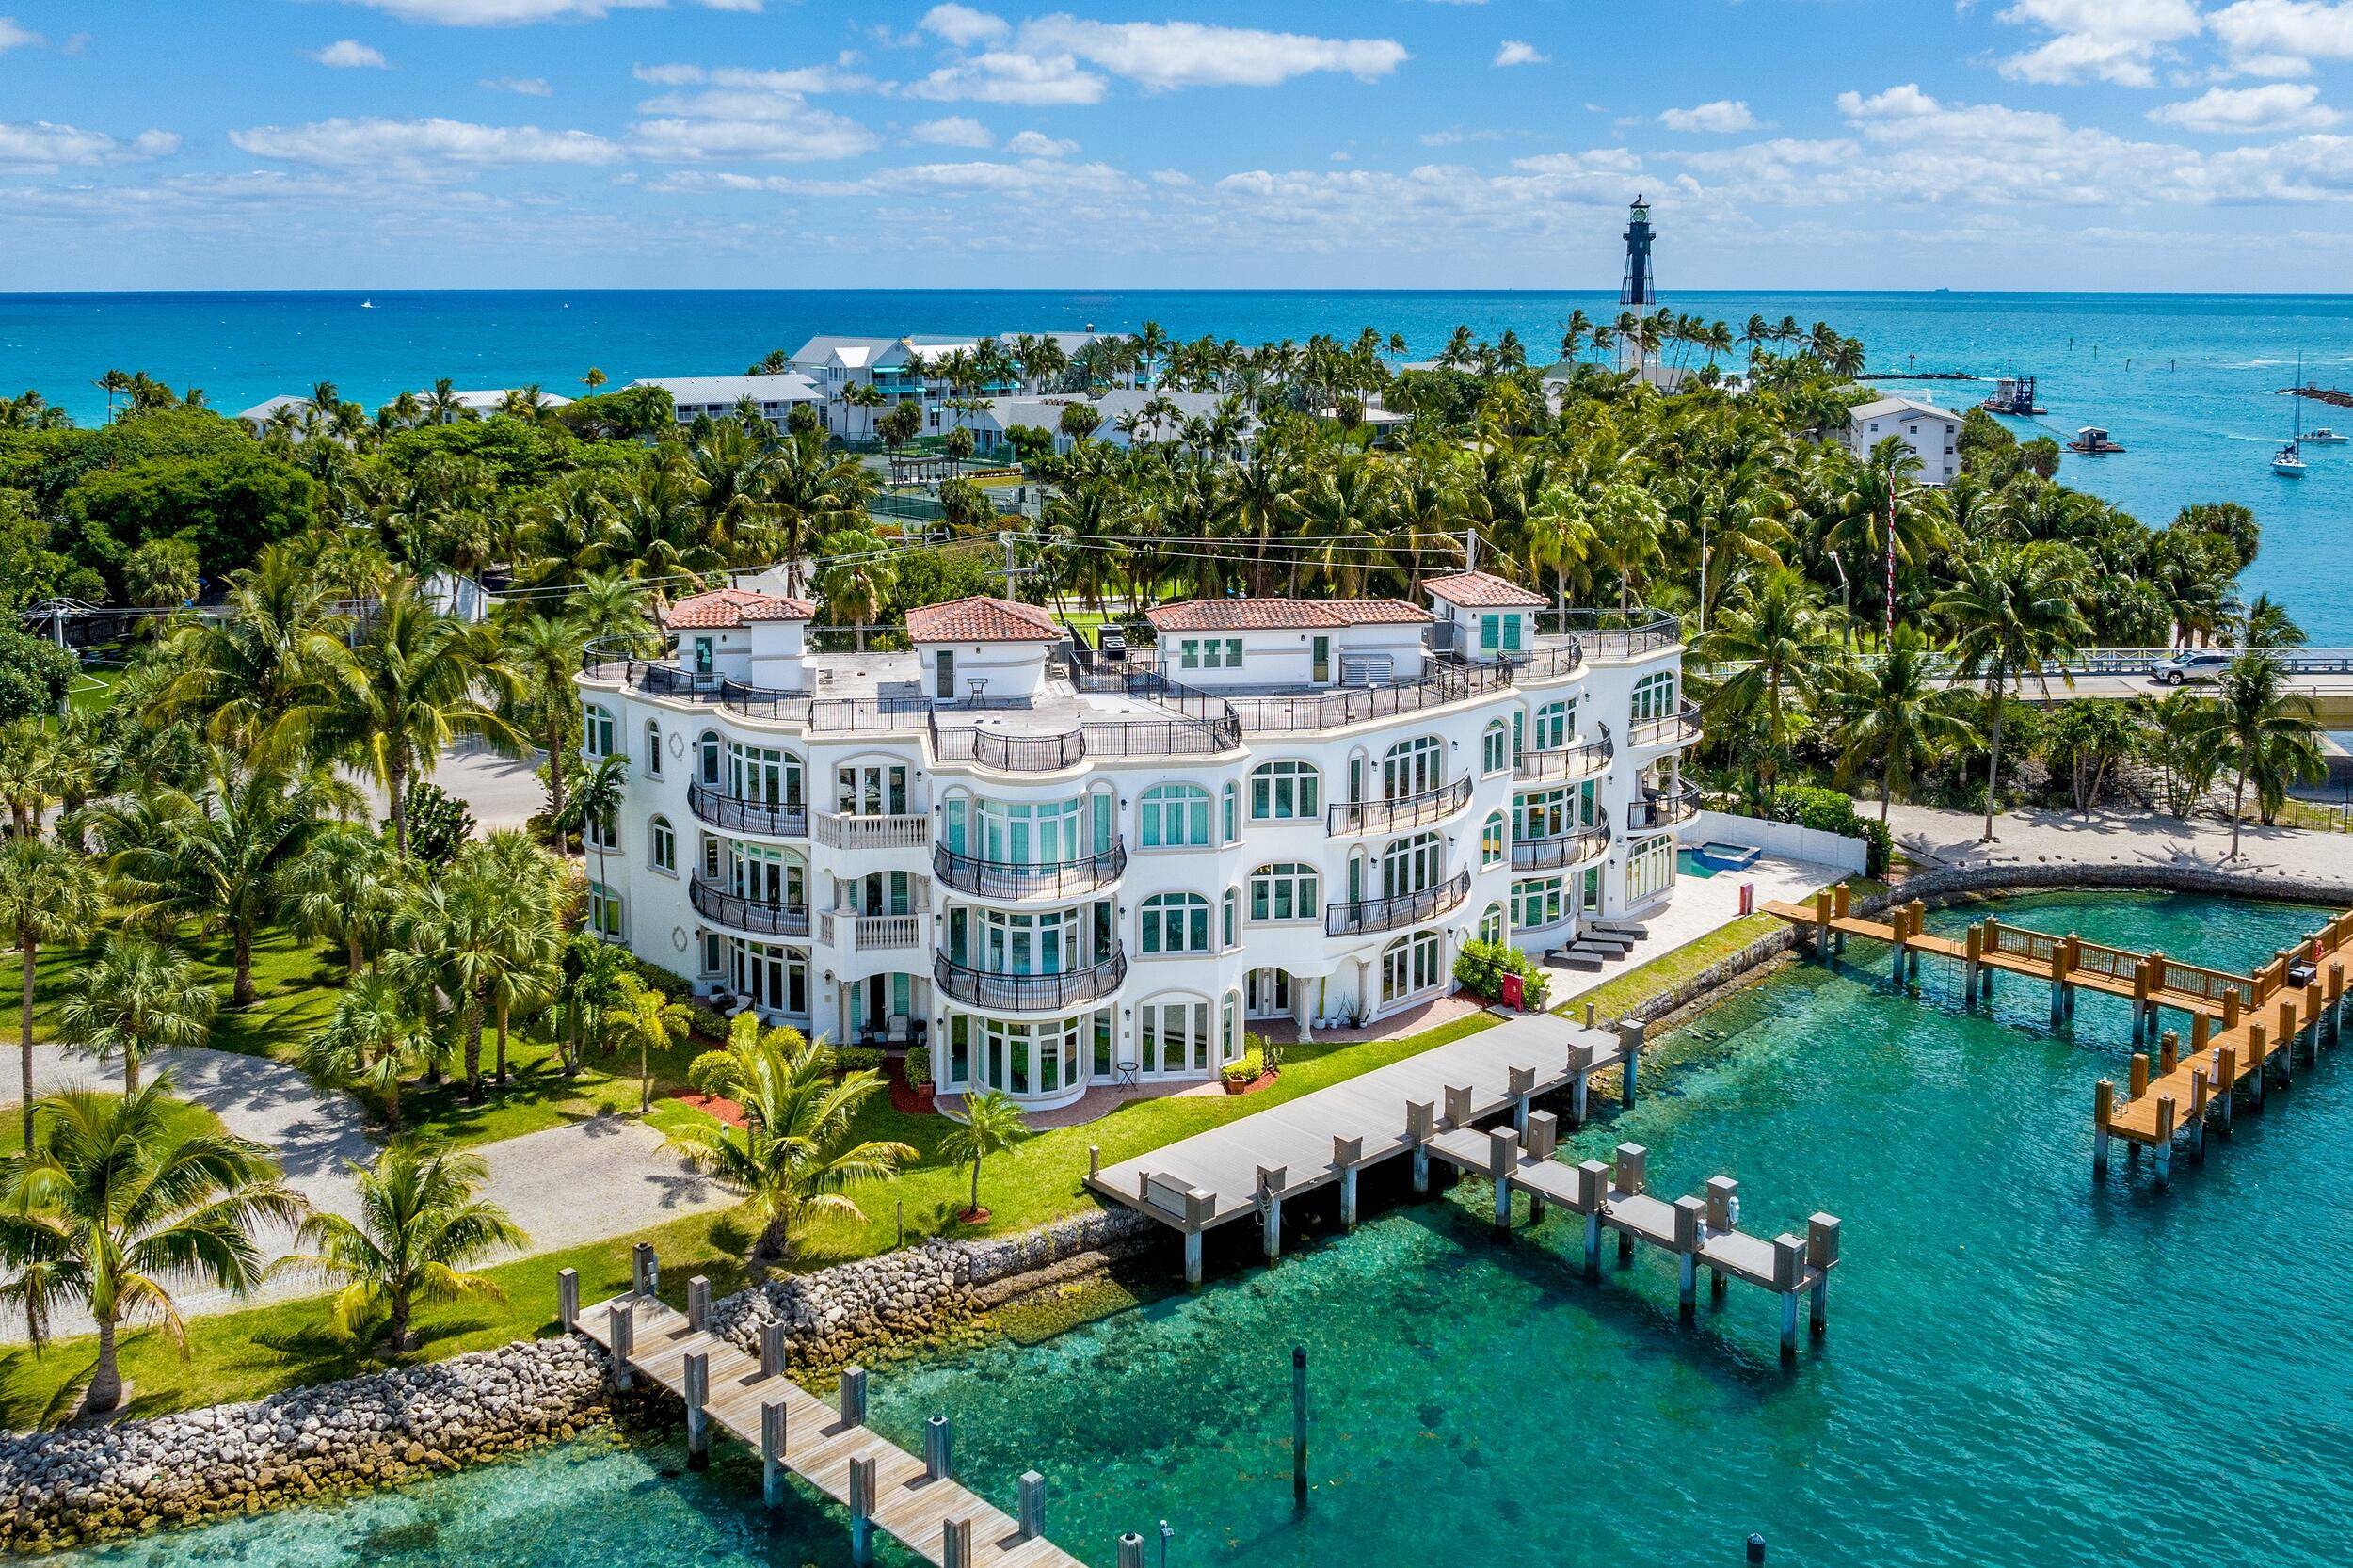 Welcome to 900 Hillsboro Mile, a prestigious intracoastal 3 story dwelling with only 4 units nestled within the opulent Hillsboro Beach enclave of Florida.